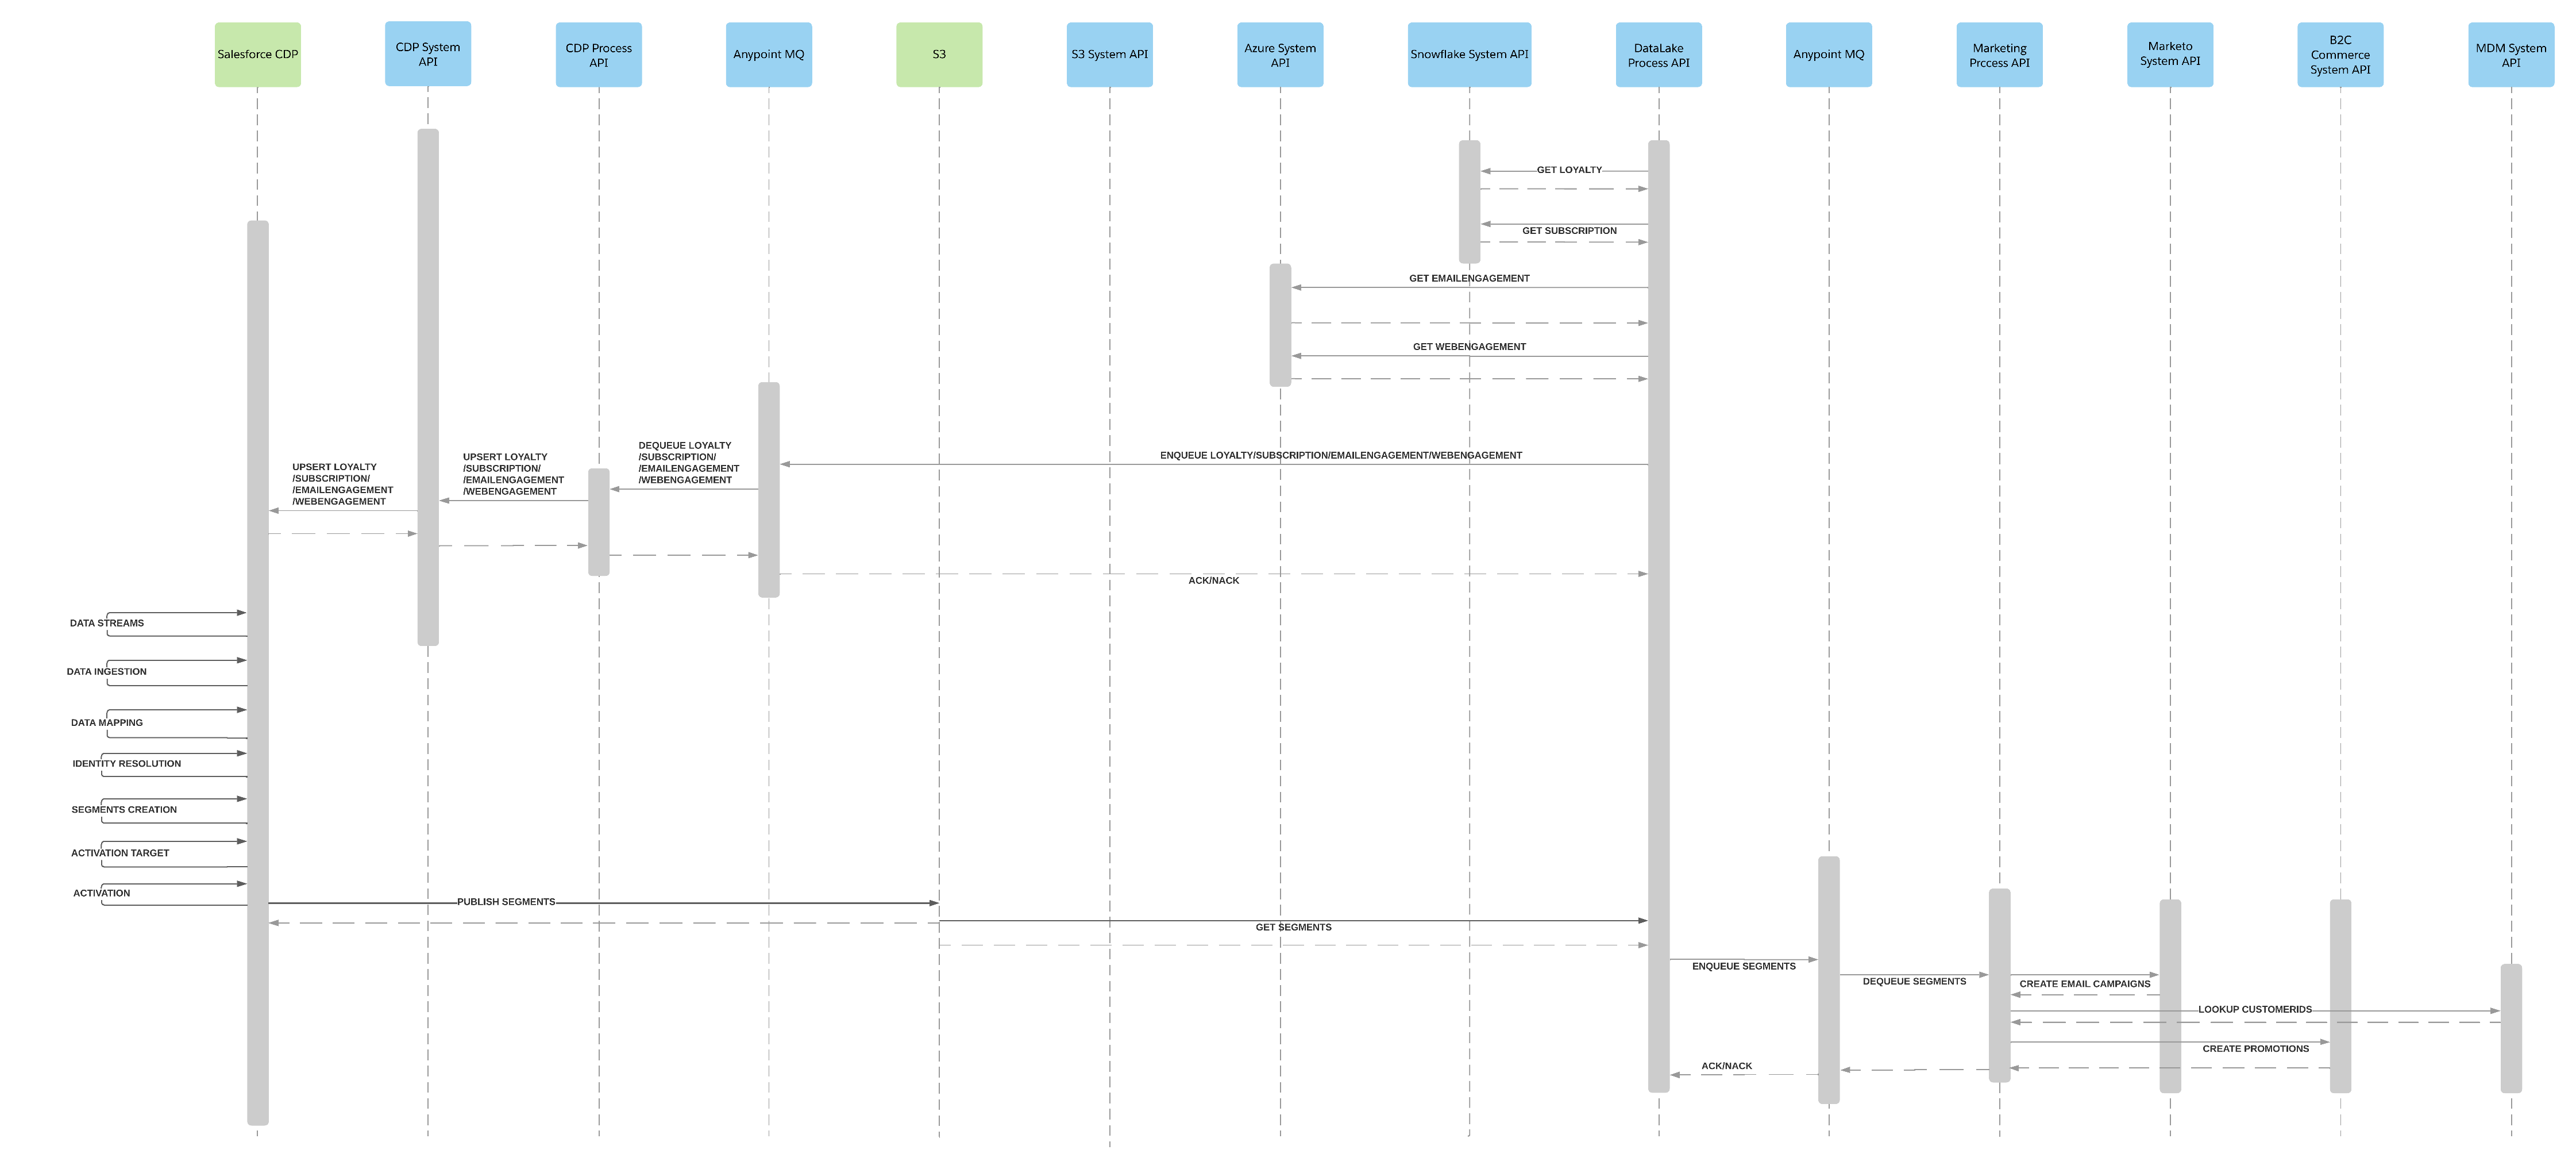 Sequence diagram for CDP personalization use case of the Retail accelerator